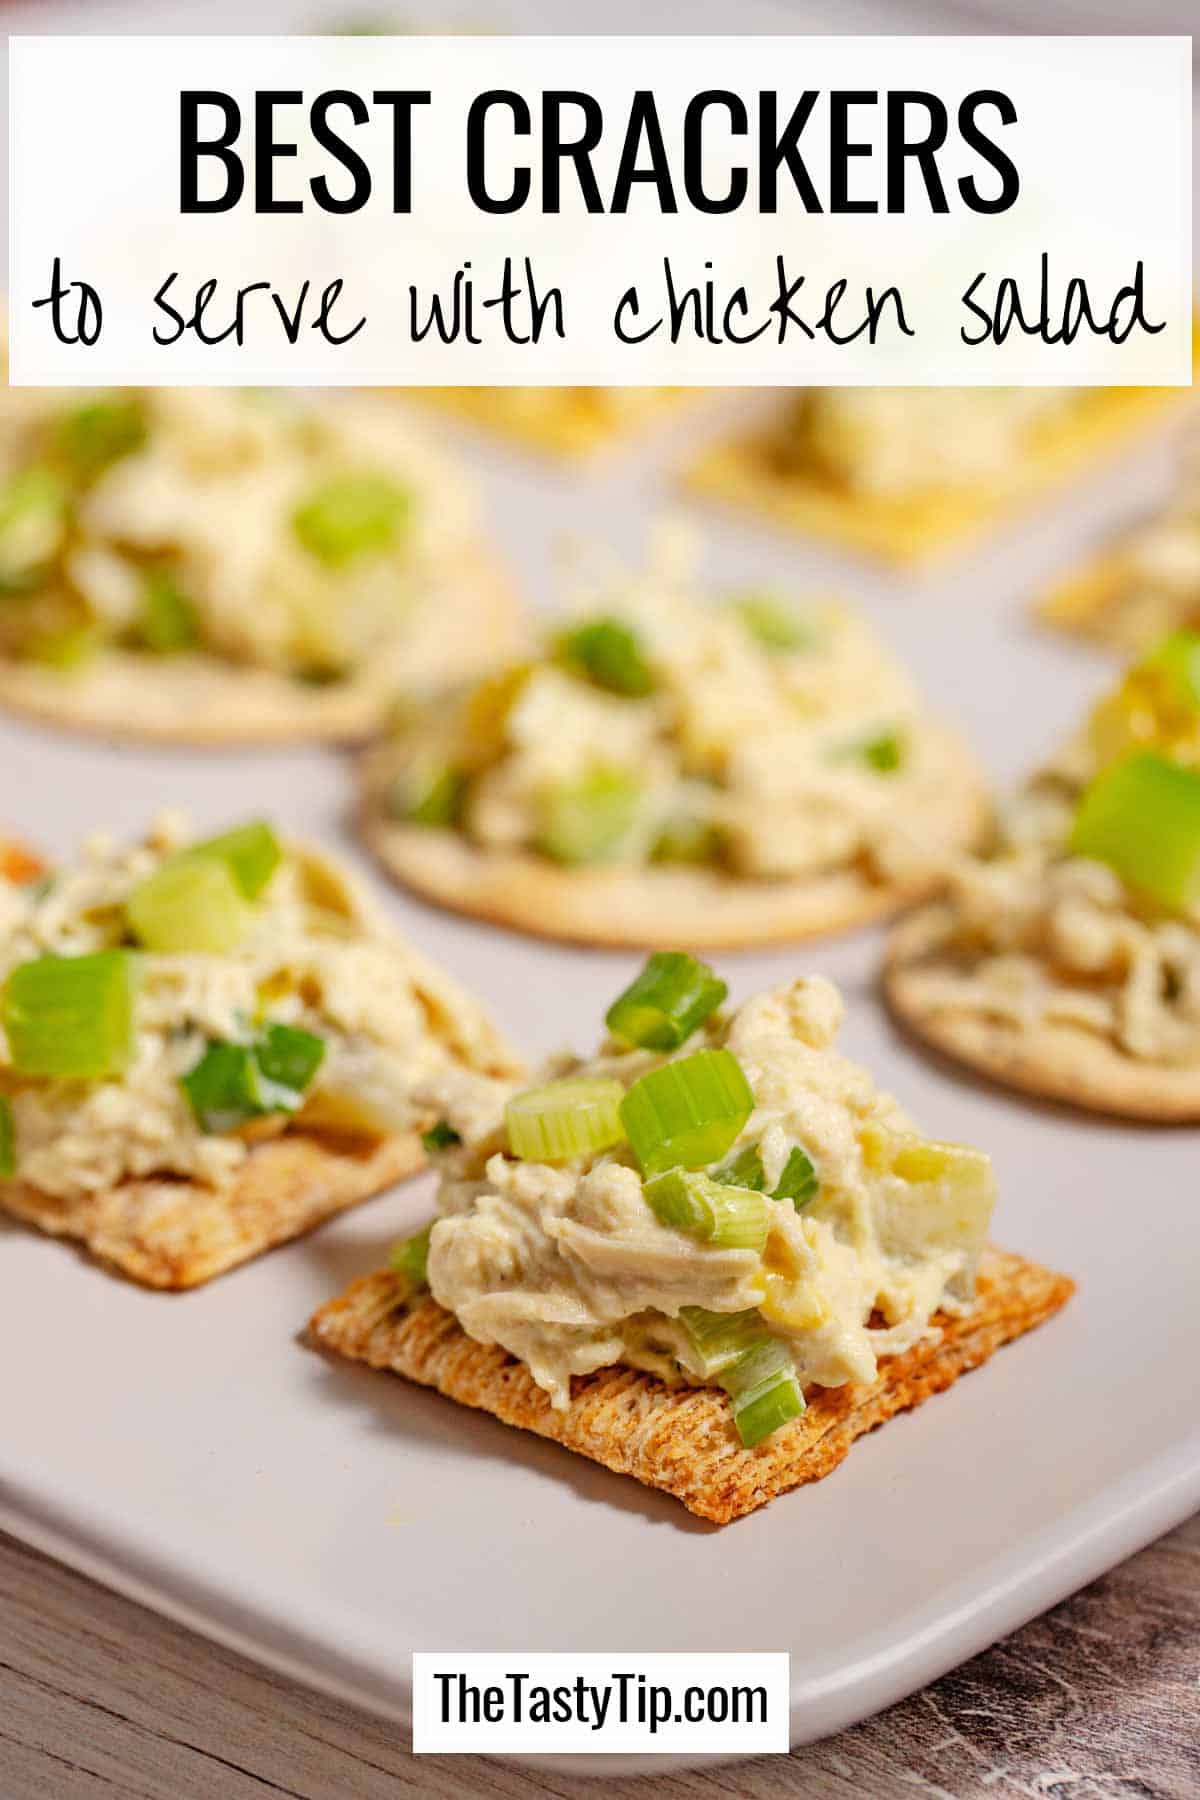 Pinterest pin showing a plate of chicken salad cracker appetizers.